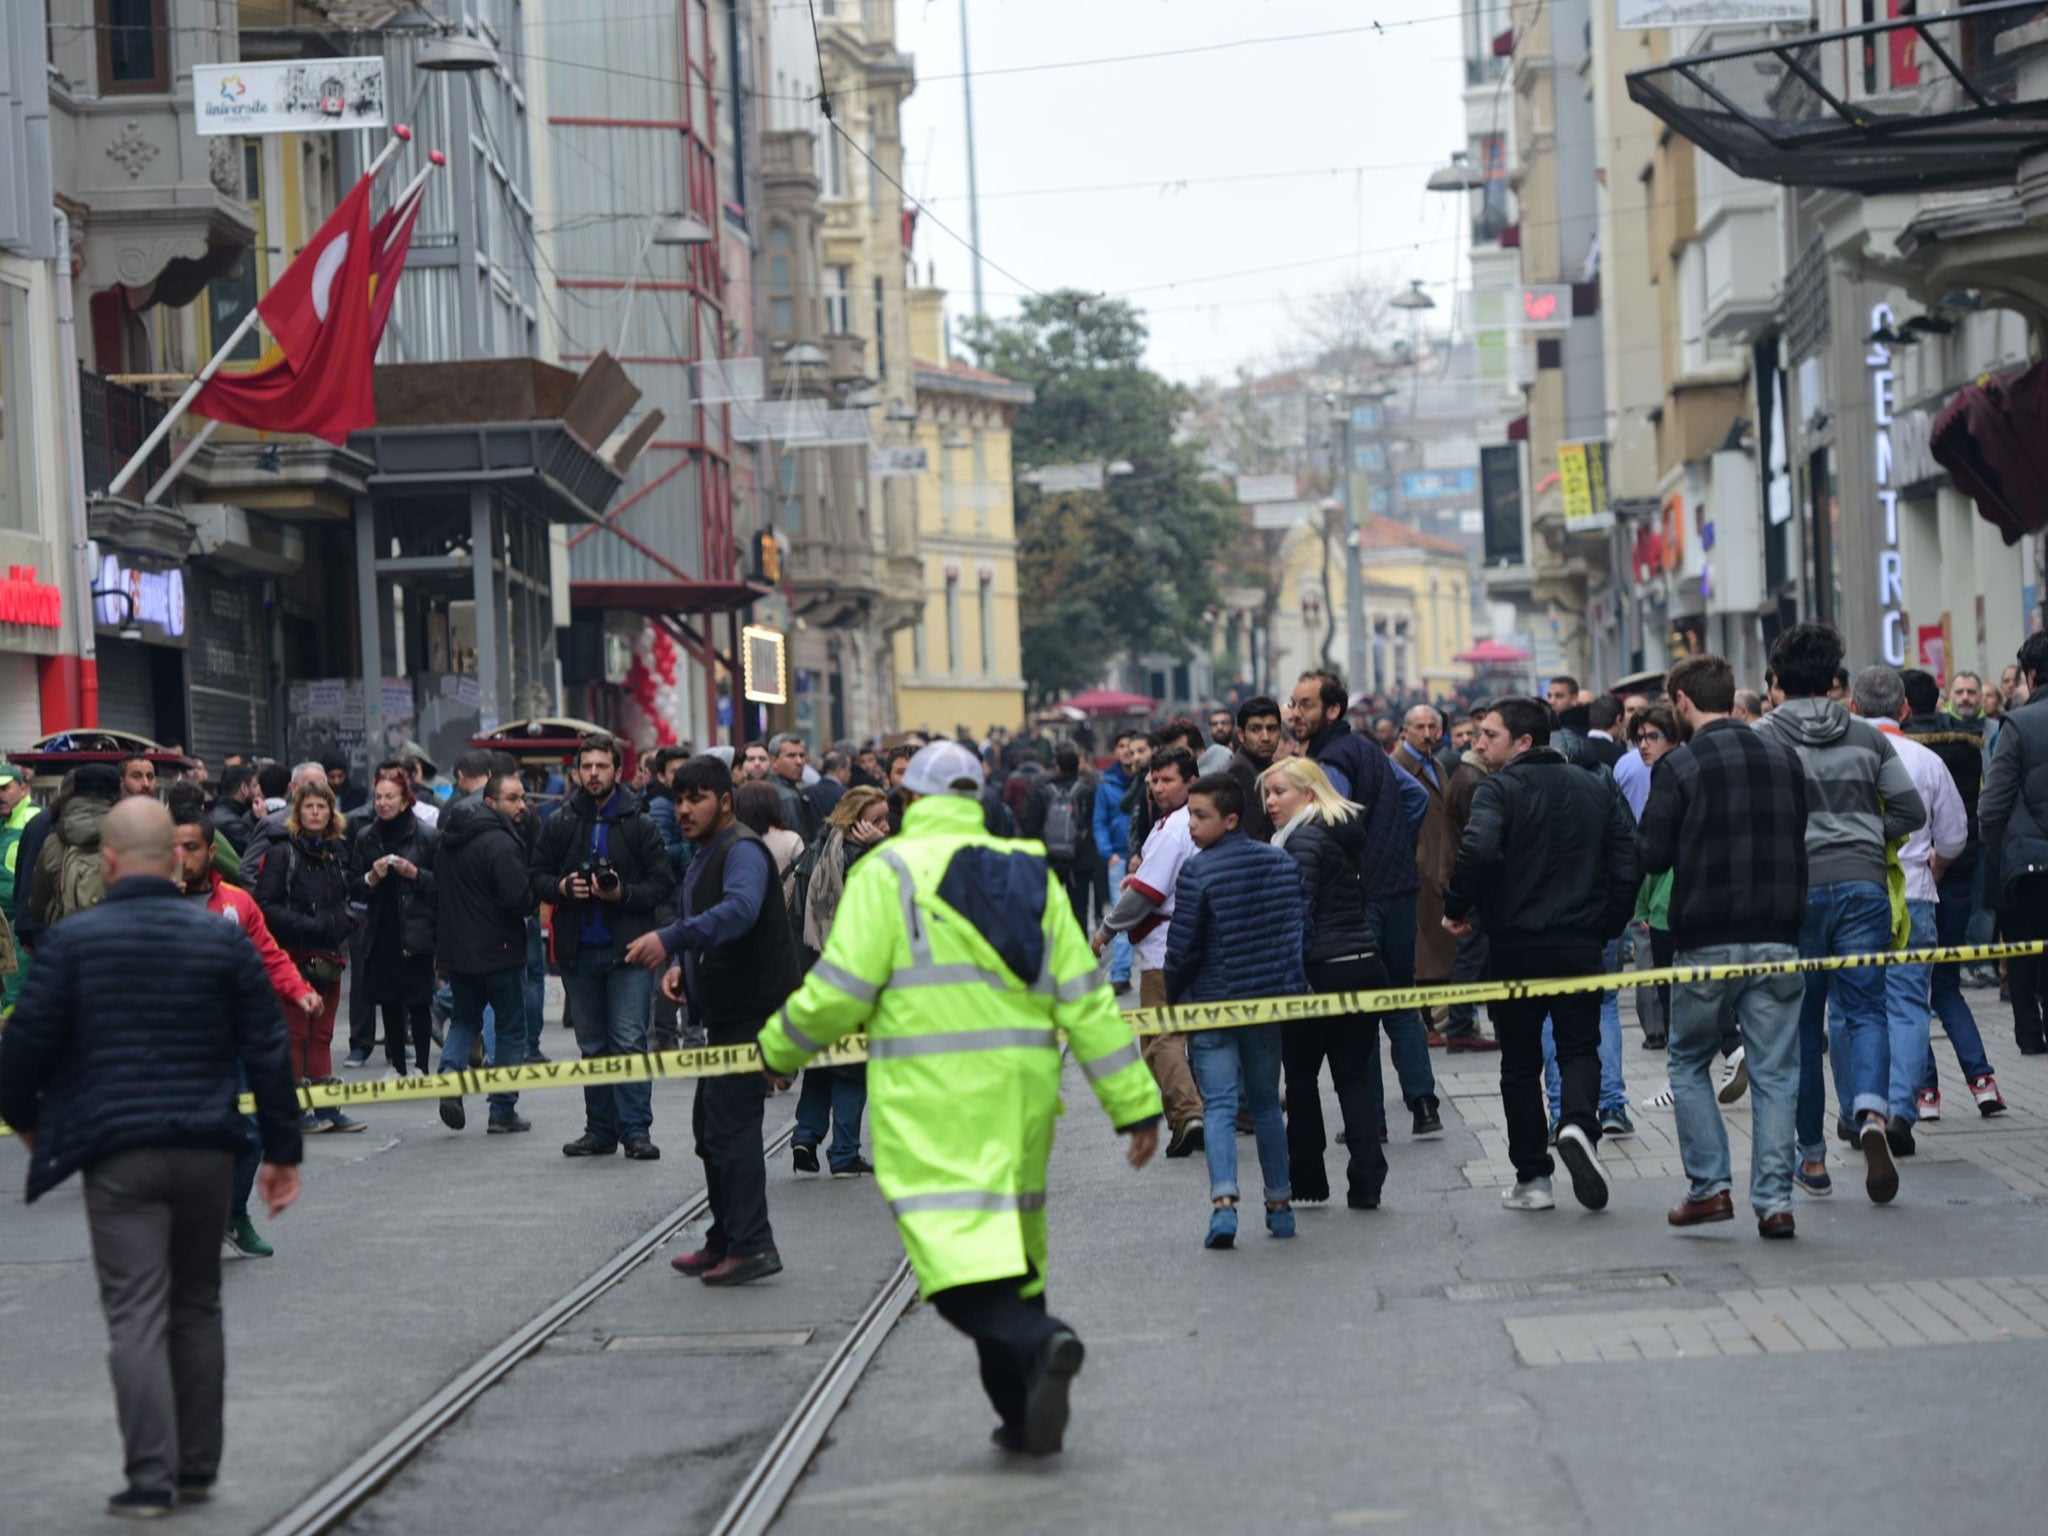 Turkish police push people away after an explosion on the pedestrian Istiklal Avenue in Istanbul on March 19, 2016.